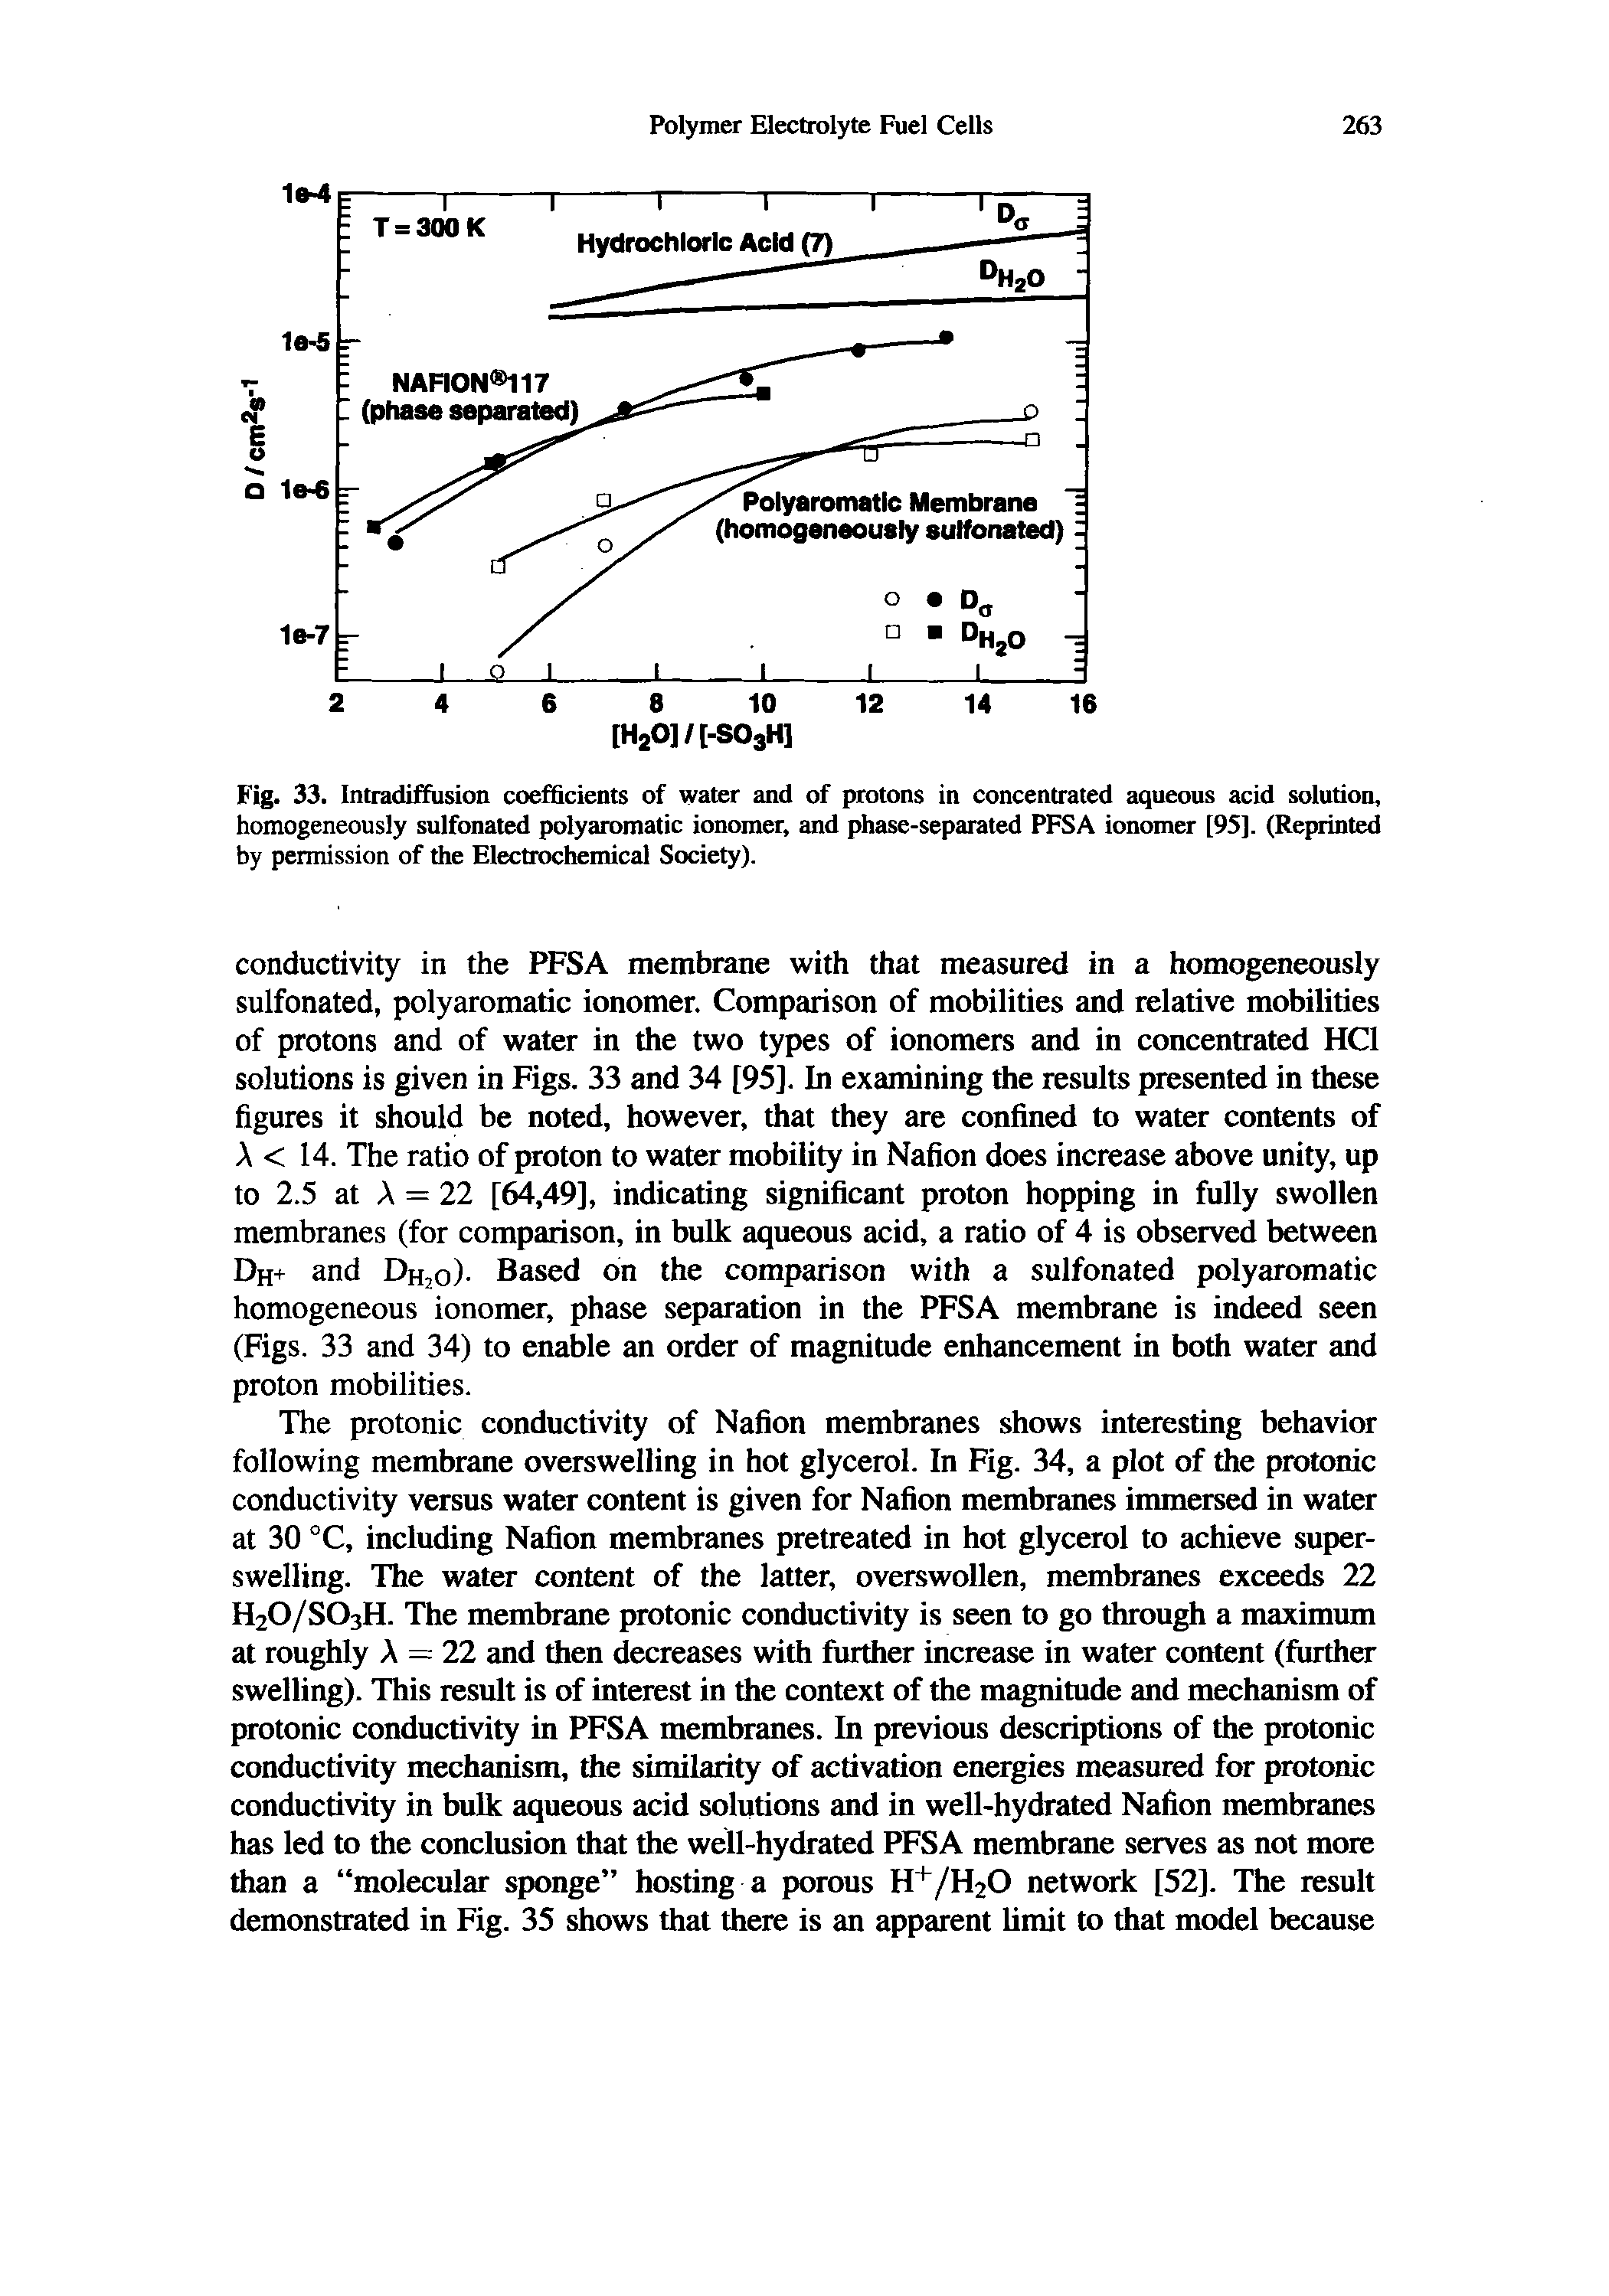 Fig. 33. Intradiffusion coefficients of water and of protons in concentrated aqueous acid solution, homogeneously sulfonated polyaromatic ionomer, and phase-separated PFSA ionomer [95]. (Reprinted by permission of the Electrochemical Society).